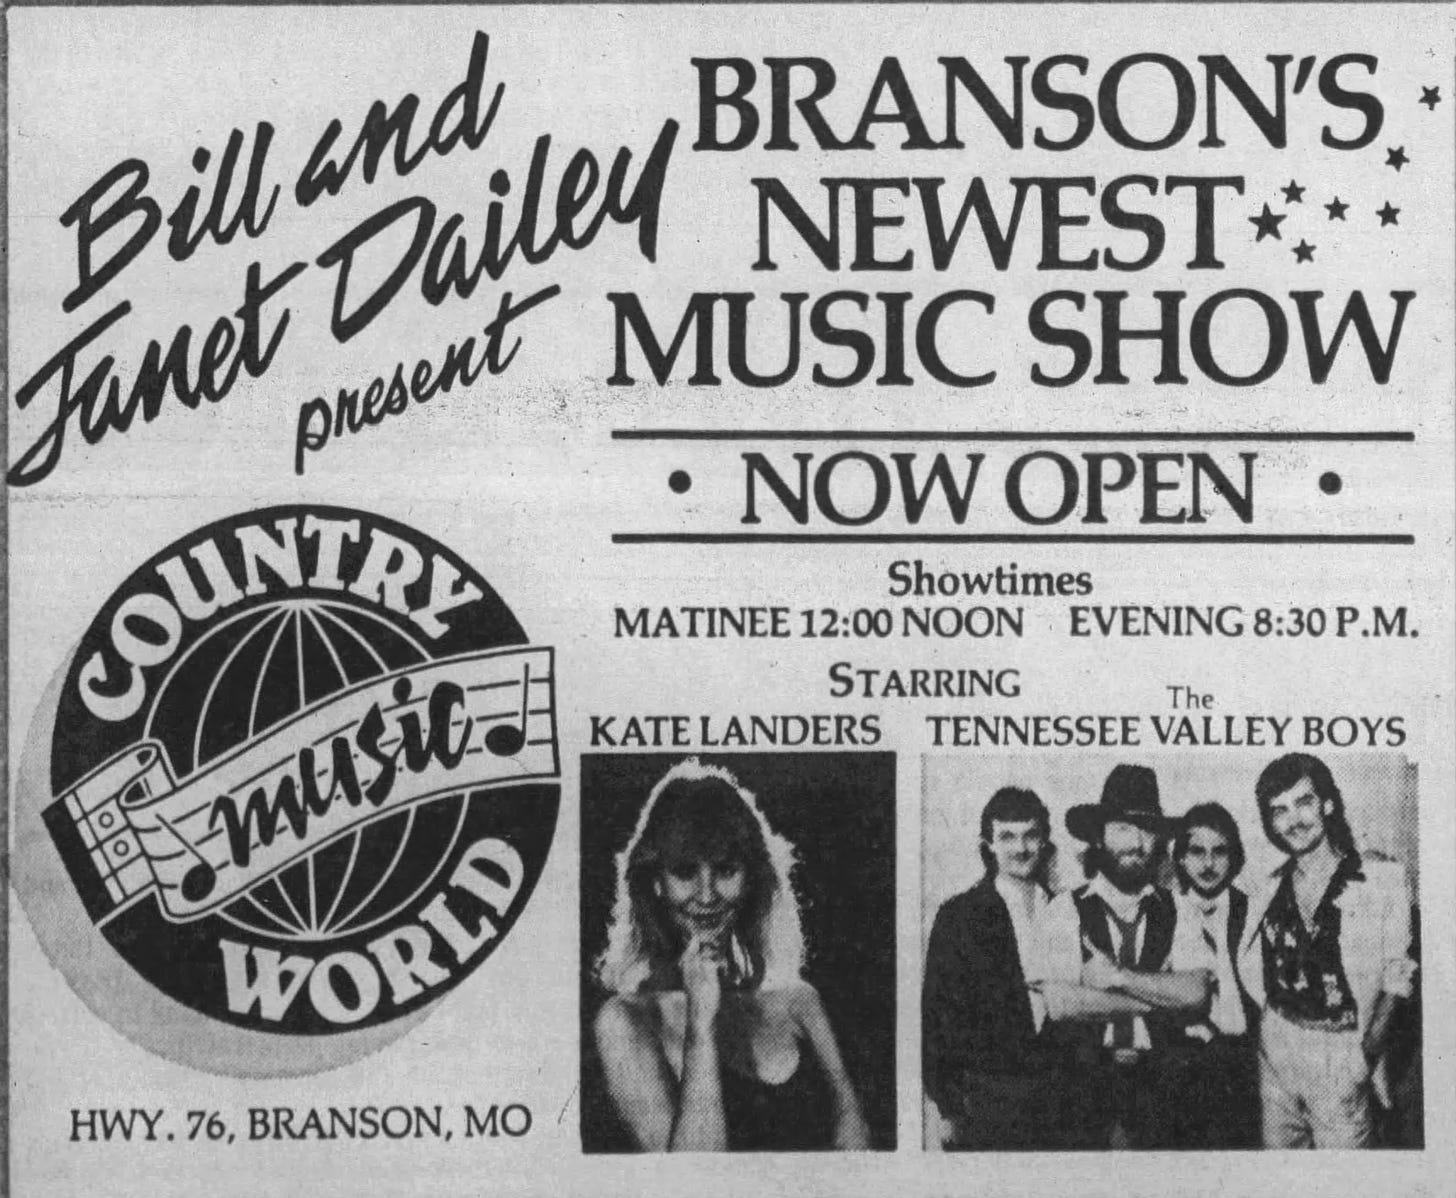 A newspaper add that says: "Bill and Janet Dailey Present, Branson's newest show: Kate Landers and The Tennessee Valley Boys at Country Music World